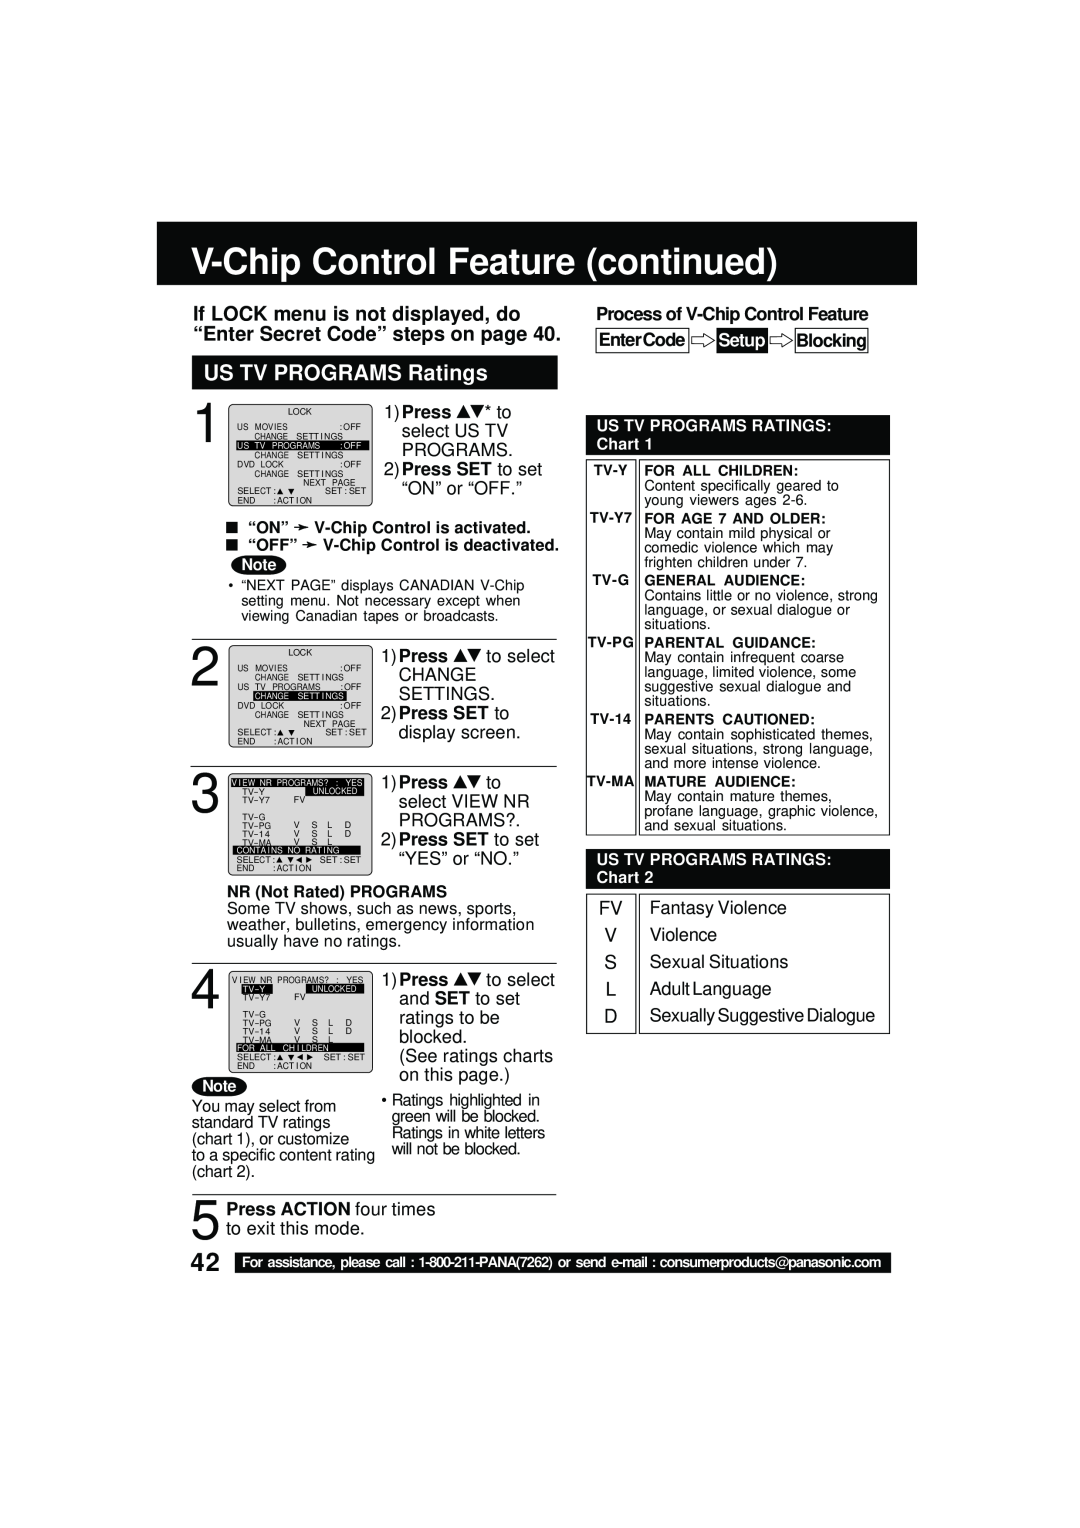 Panasonic PV DM2092 manual V-Chip Control Feature continued, US TV PROGRAMS Ratings, Press SET to set 